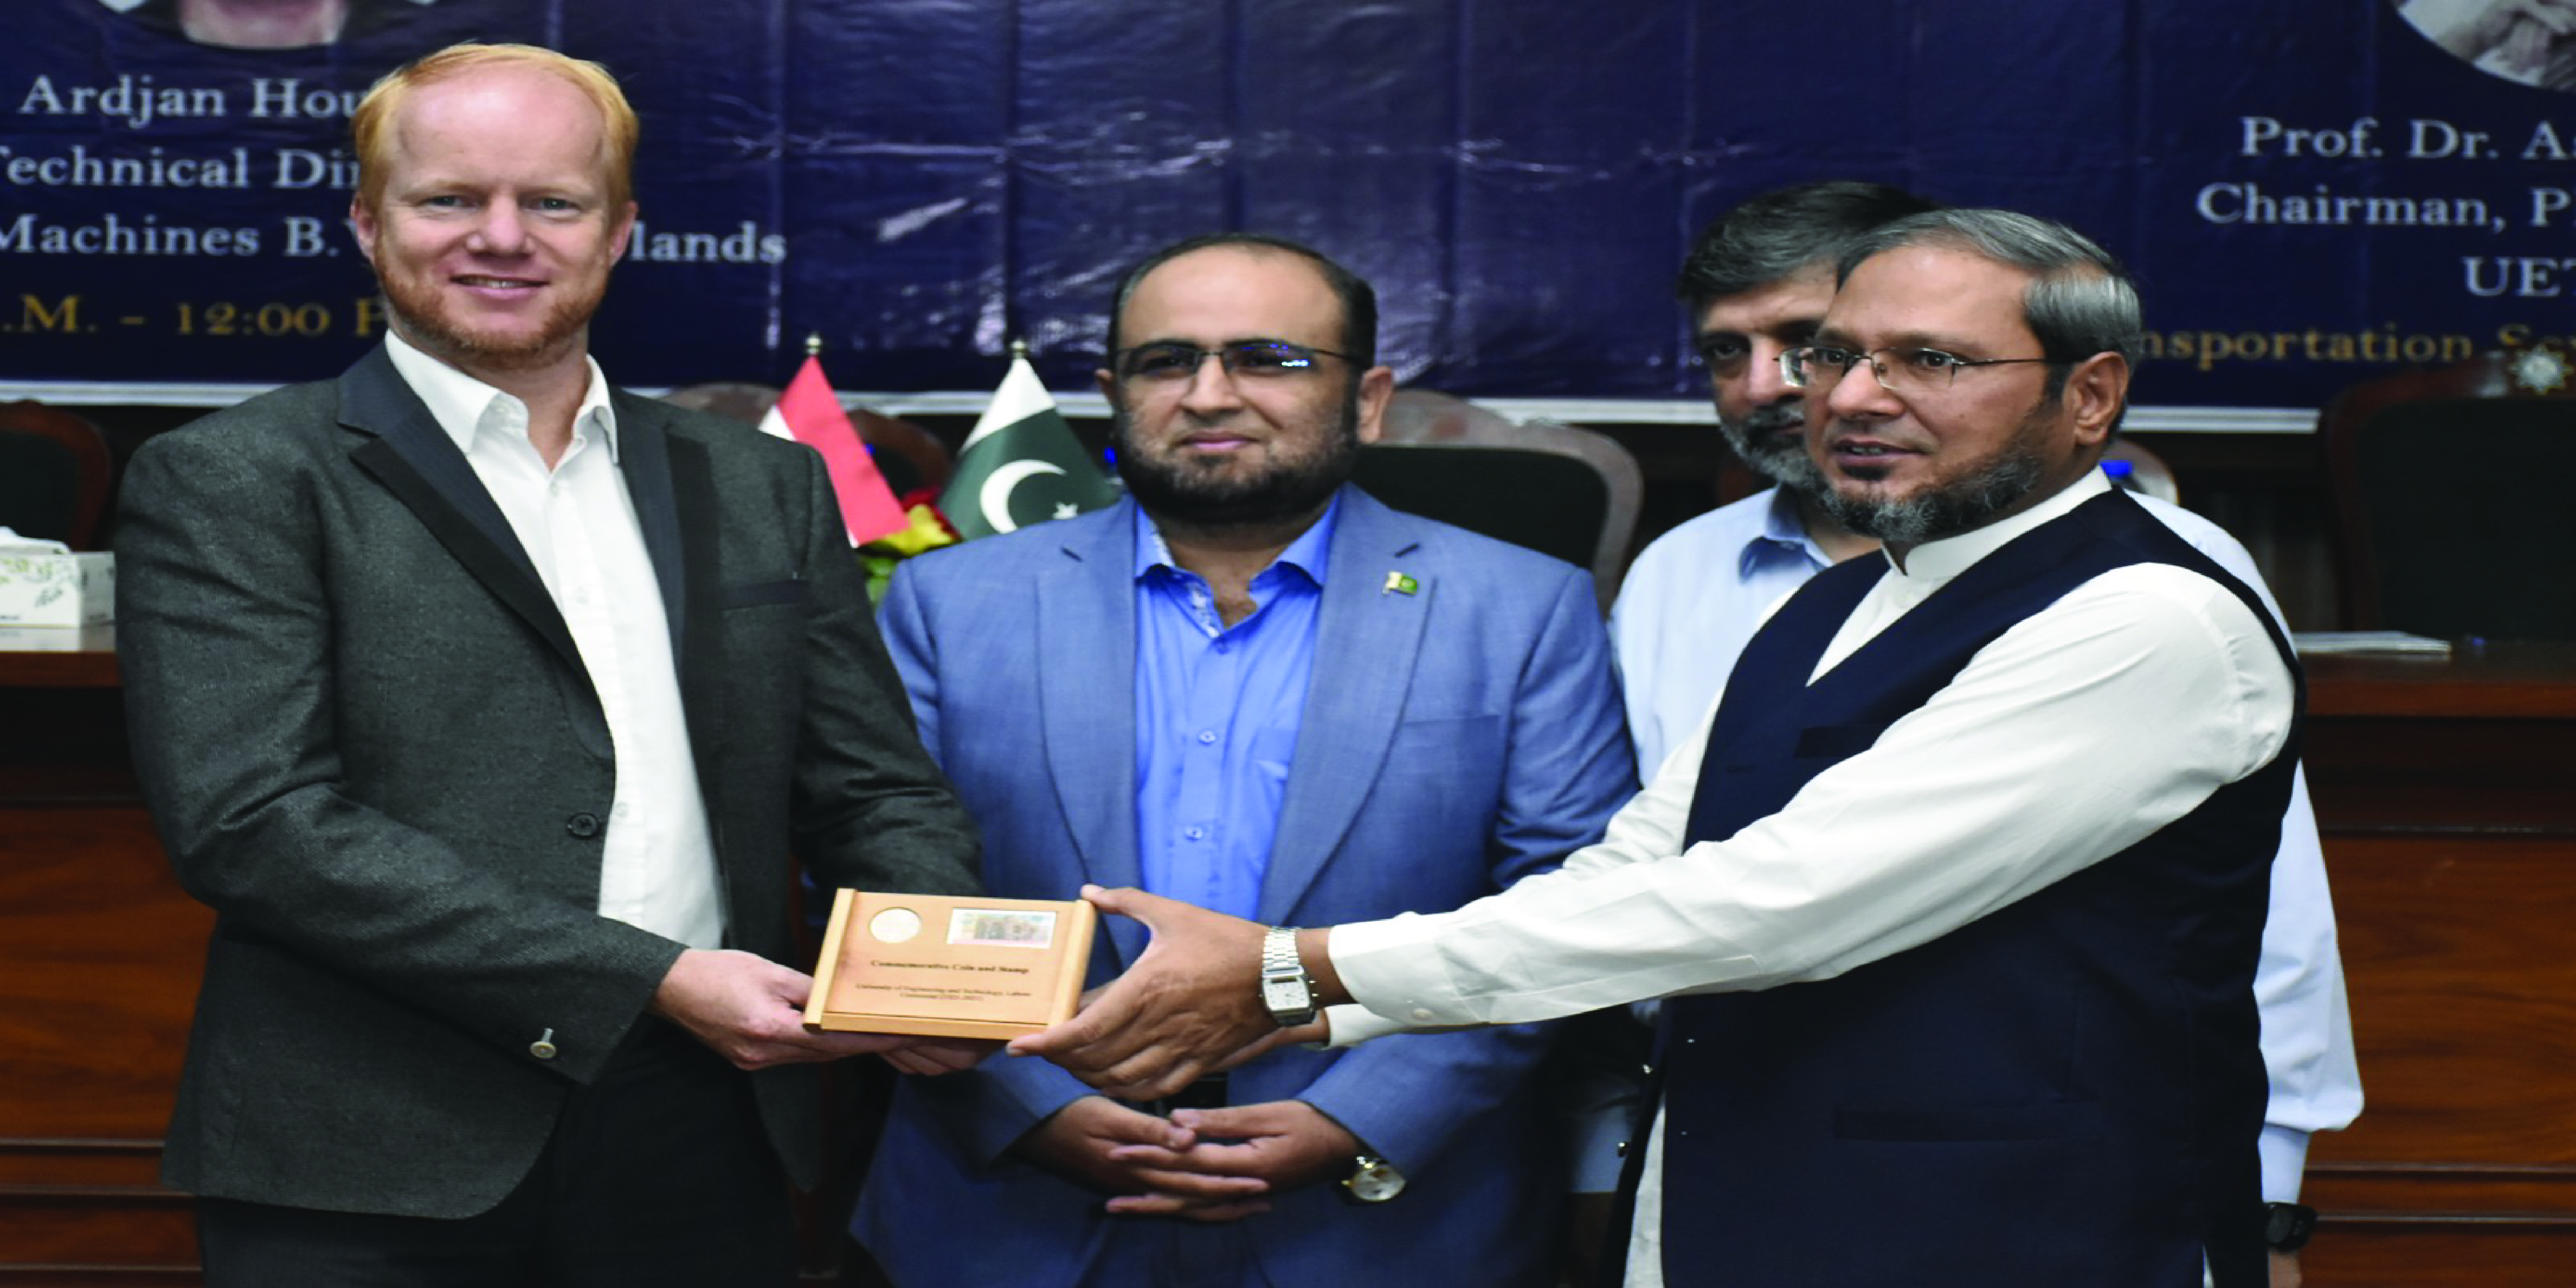 Seminar on Polymer Sheet Extrusion: Materials & Technology held at UET Lahore